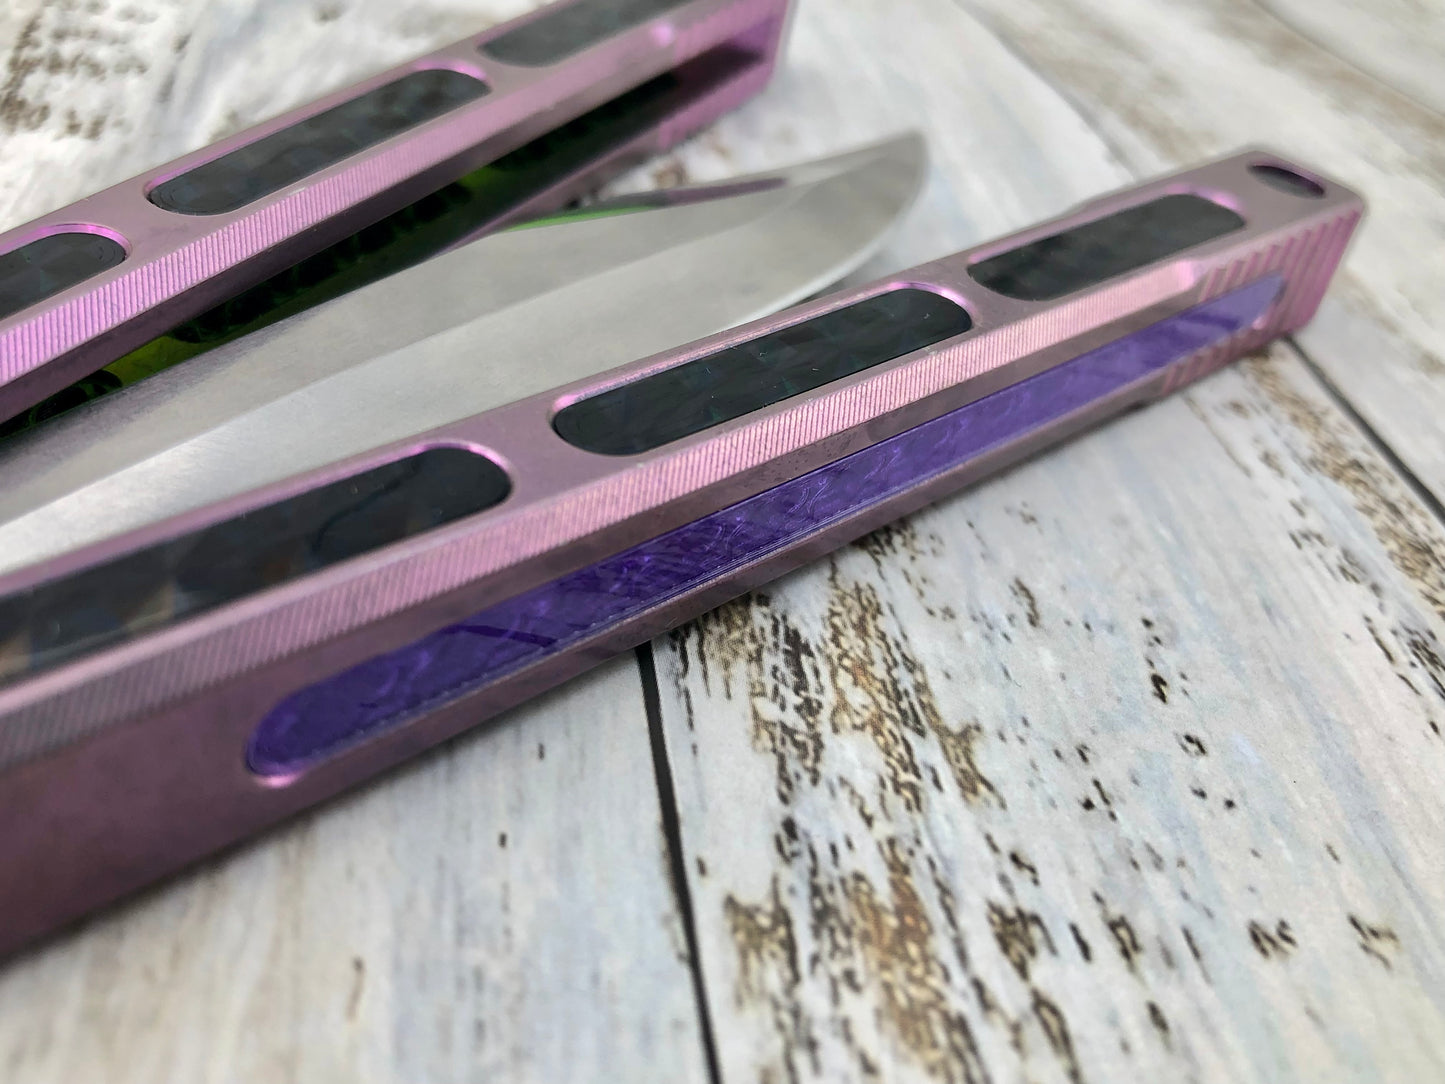 Add a pop of color and silence the ring of your MachineWise Prysma v1, Prysma Pro, and SlifT v2 balisongs with these polyurethane Zippy Speed Channel inlays.